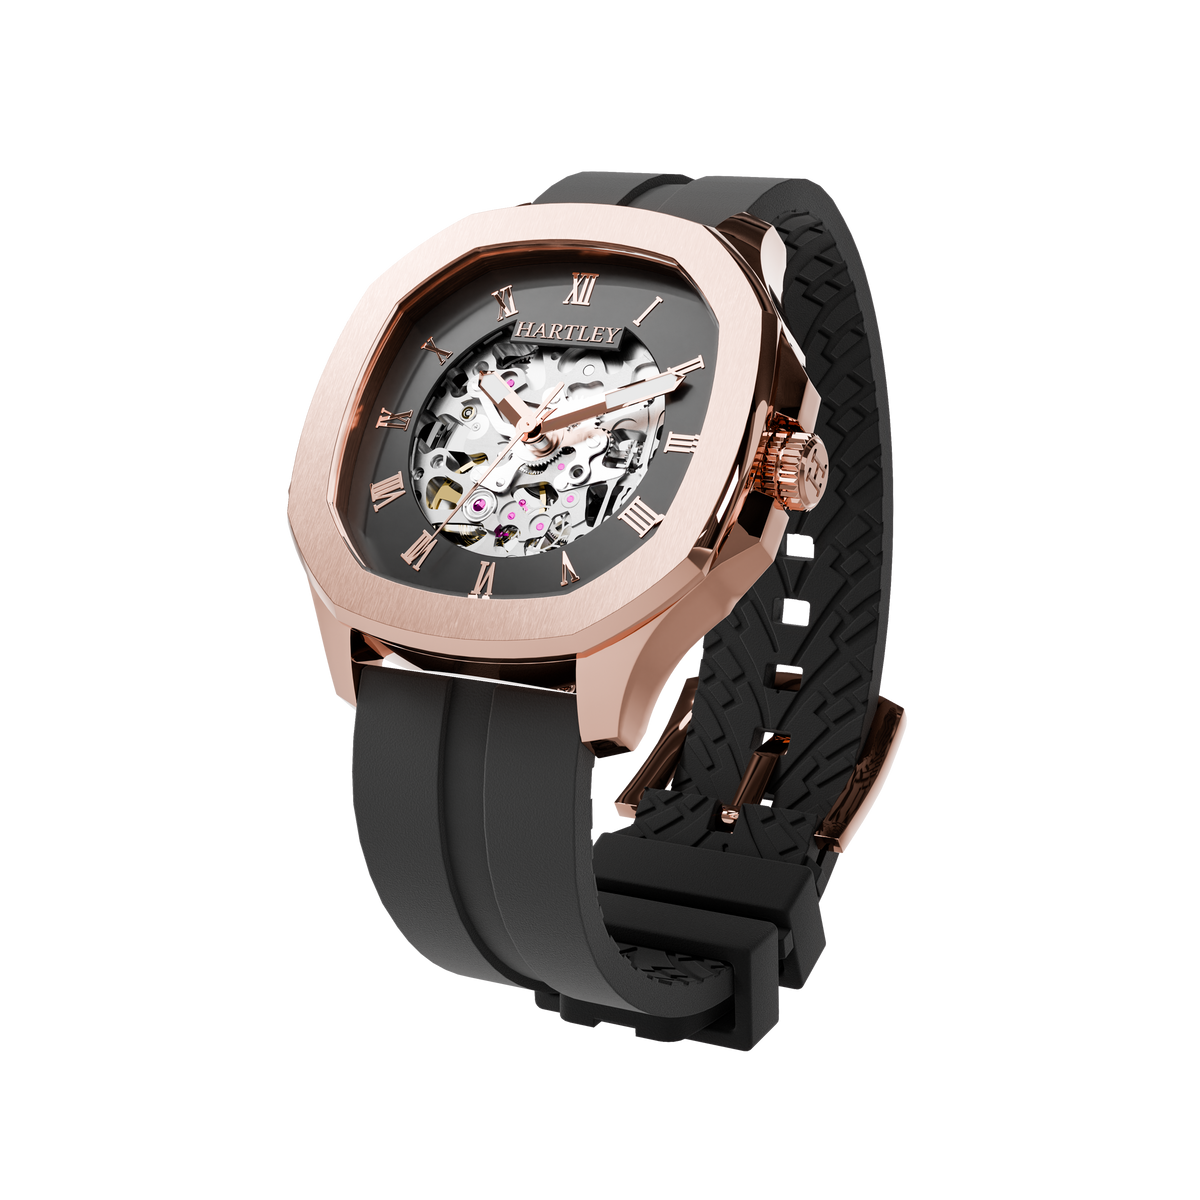 HARTLEY LEGACY ROSE GOLD BLACK SILICONE ANGLED VIEW